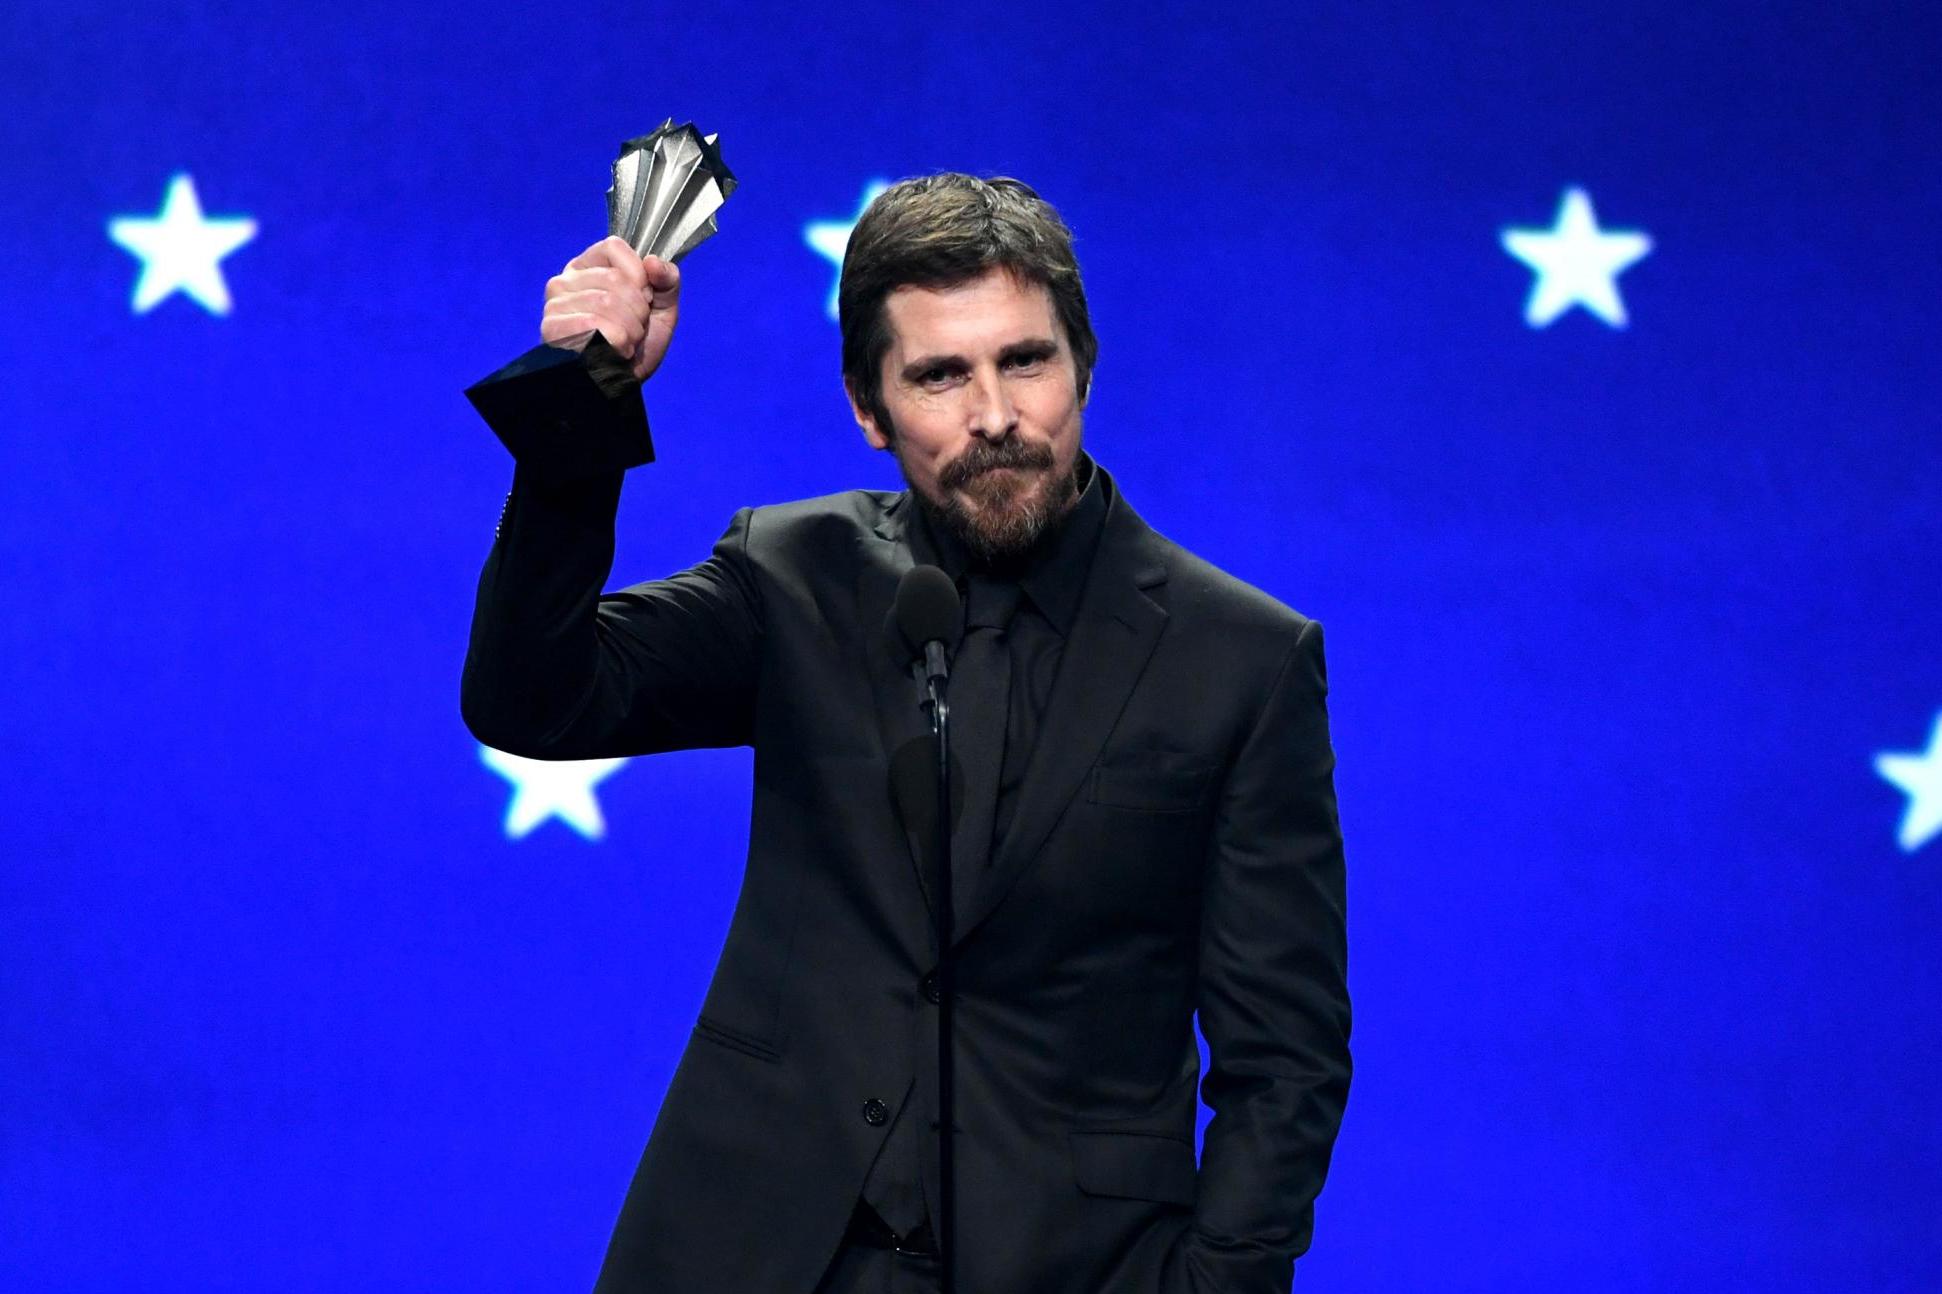 Christian Bale accepts the Best Actor award for 'Vice' at Critics Choice Awards